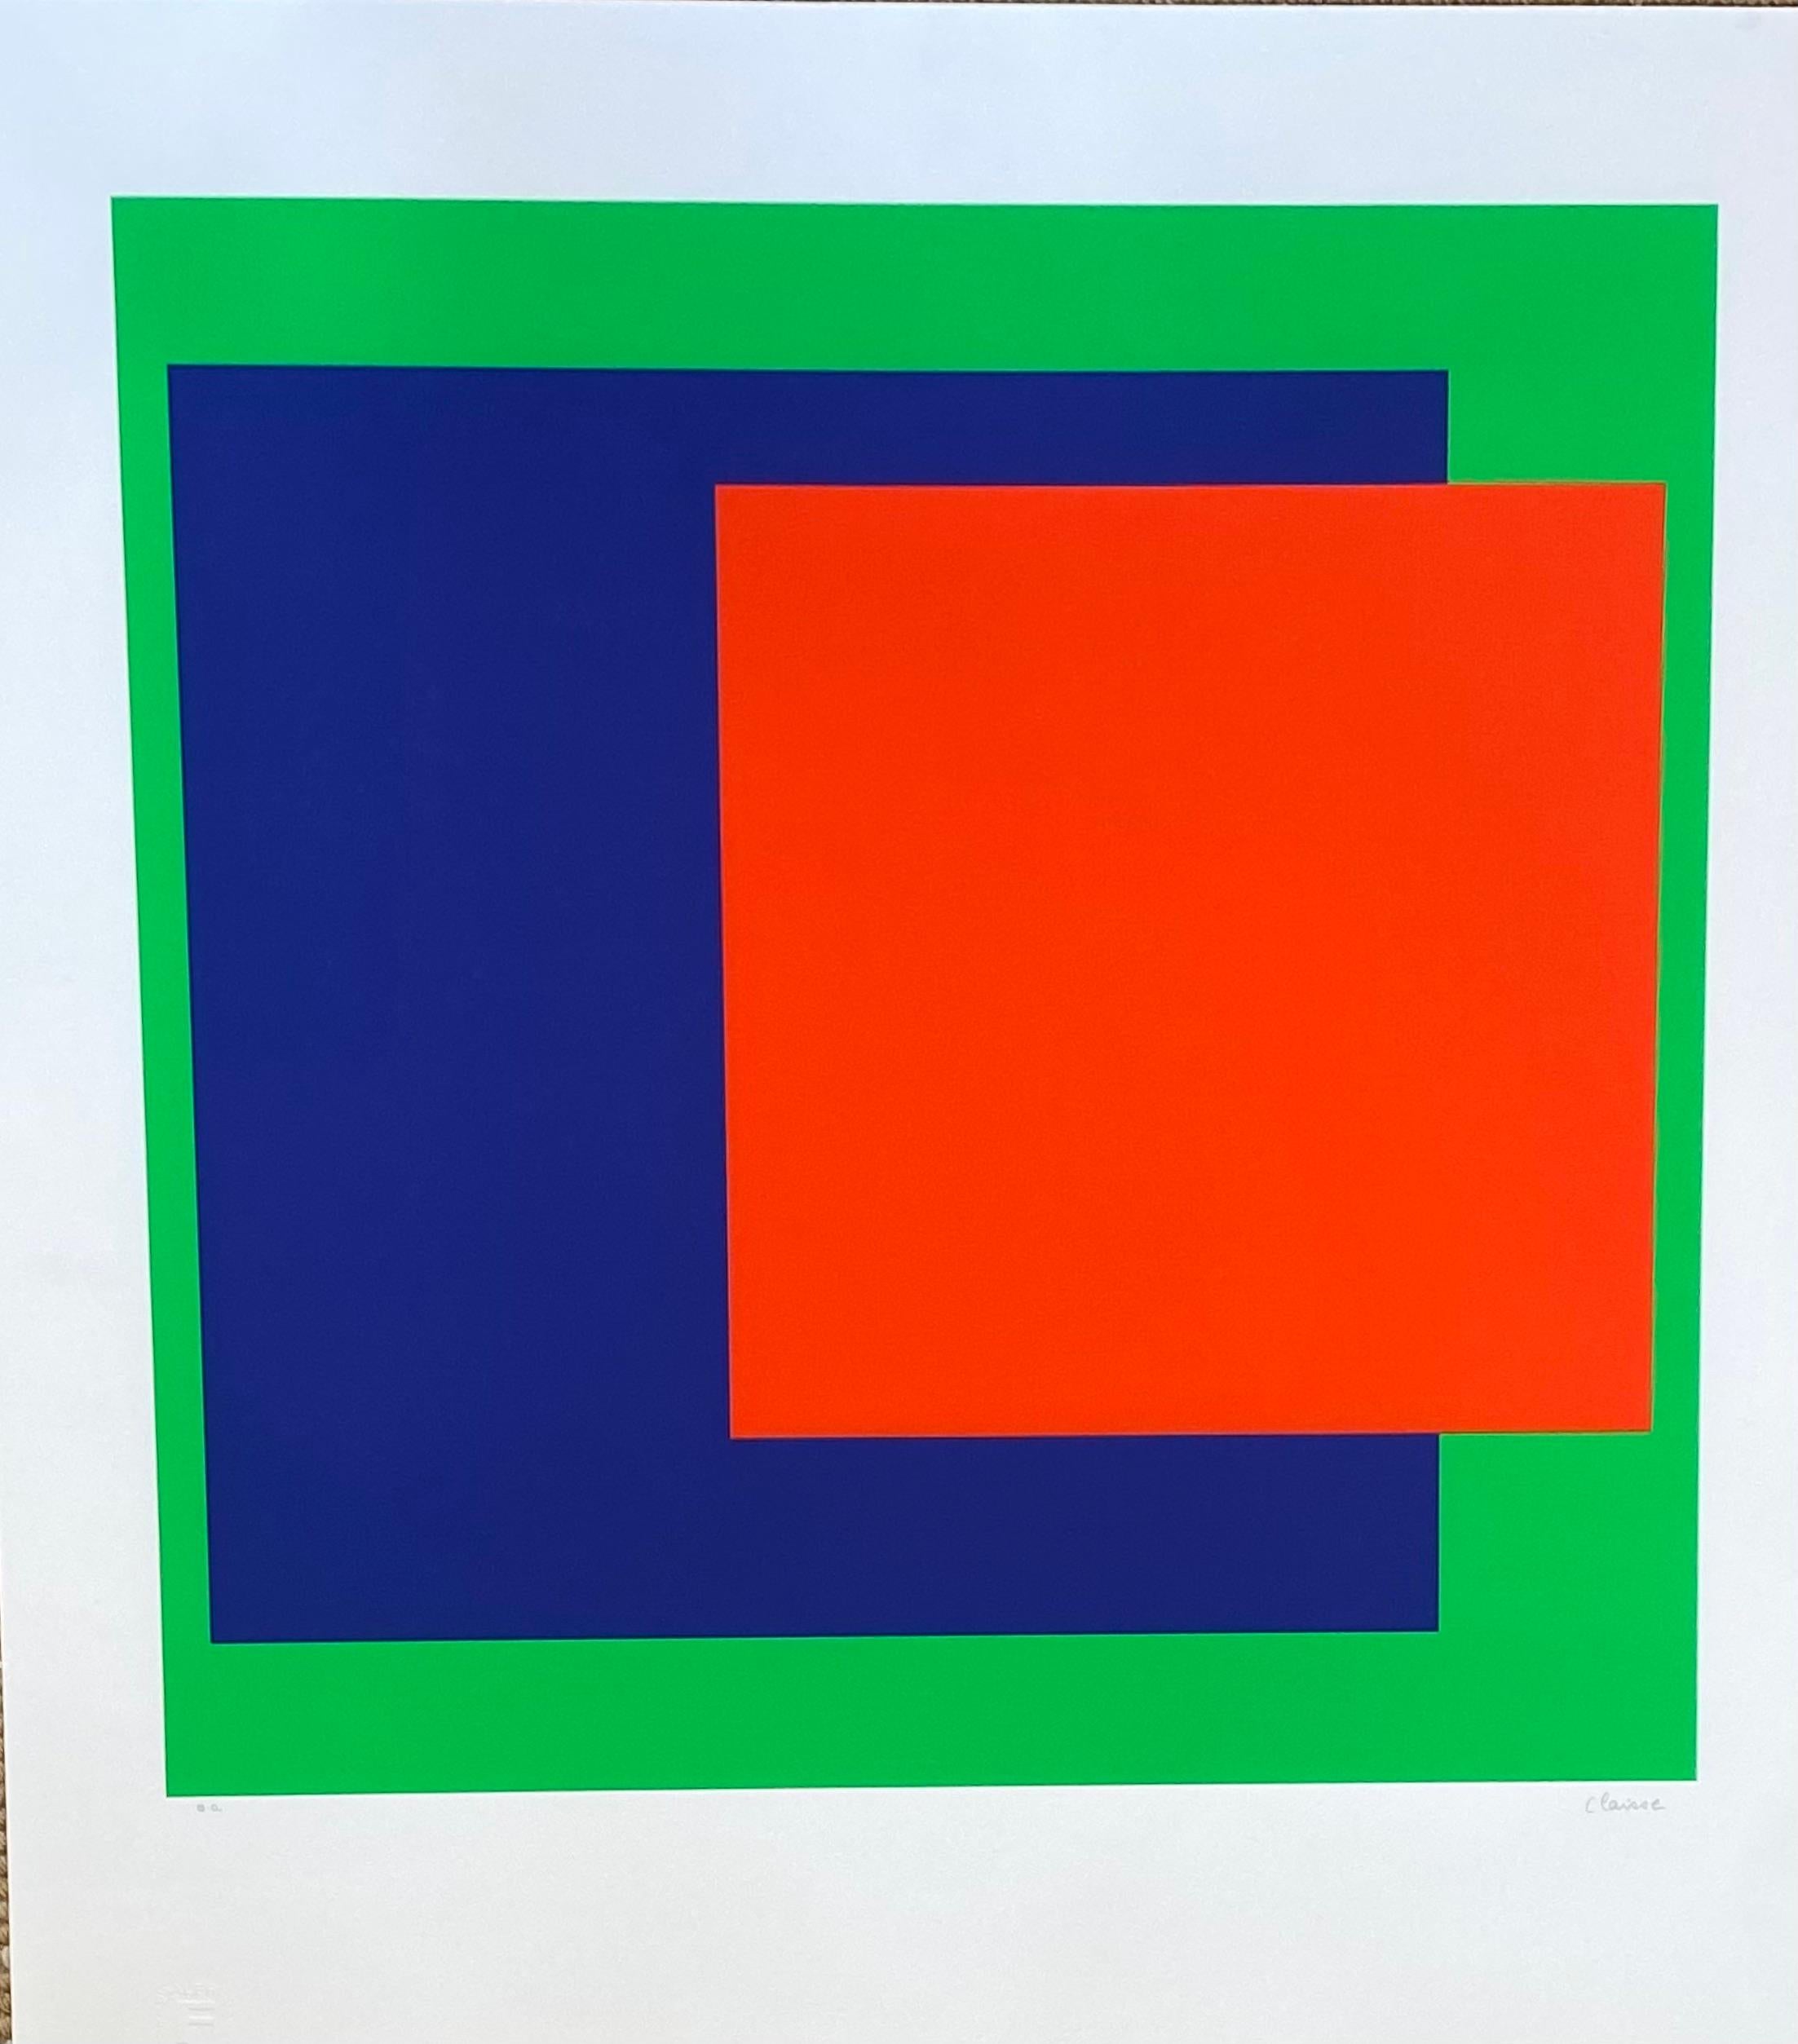 Abstract green
Serigraphy by Geneviève Claisse 
Signed by the artist in pencil and numbered 28/40
Stamp of the publisher 
circa 2014 
Dimensions : 60 x 66 x 1 cm
Price : 390 € for this piece.